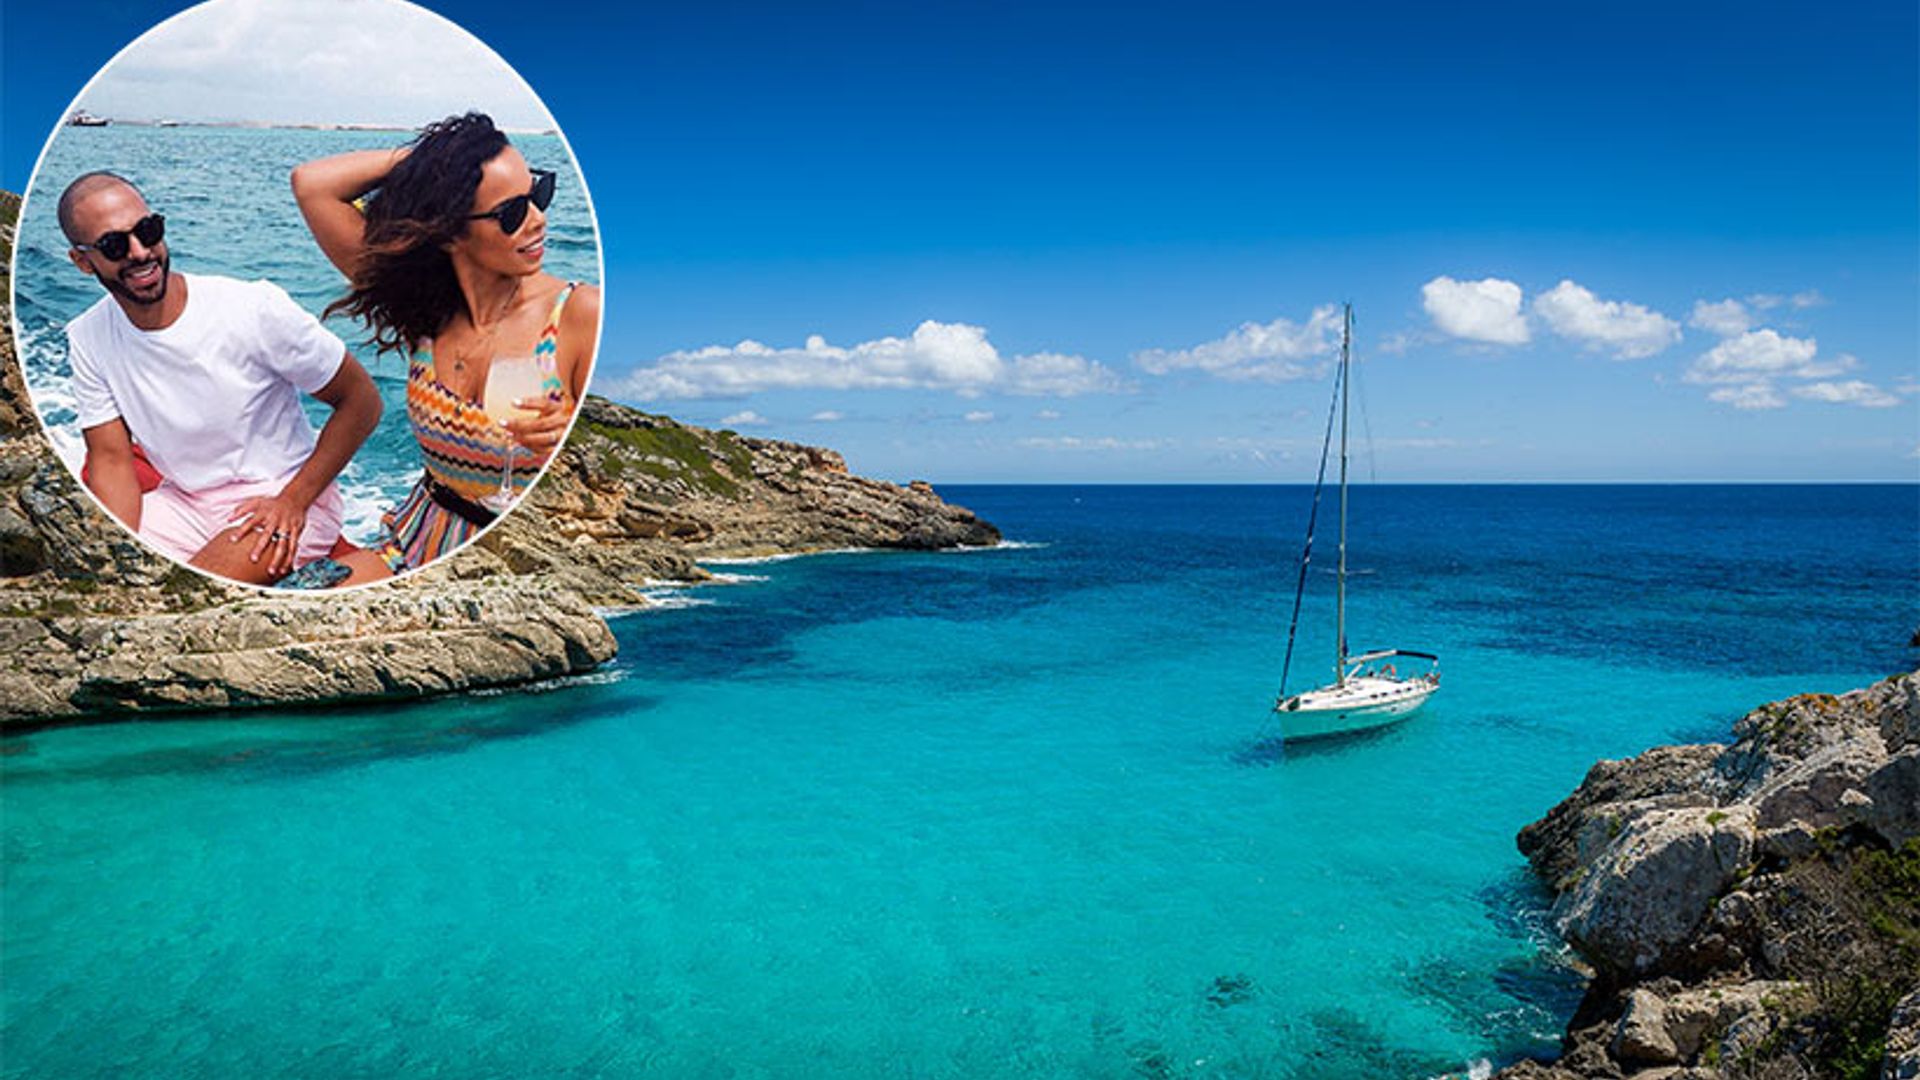 Rochelle Humes' holiday photos will make you want to book the next flight to Ibiza